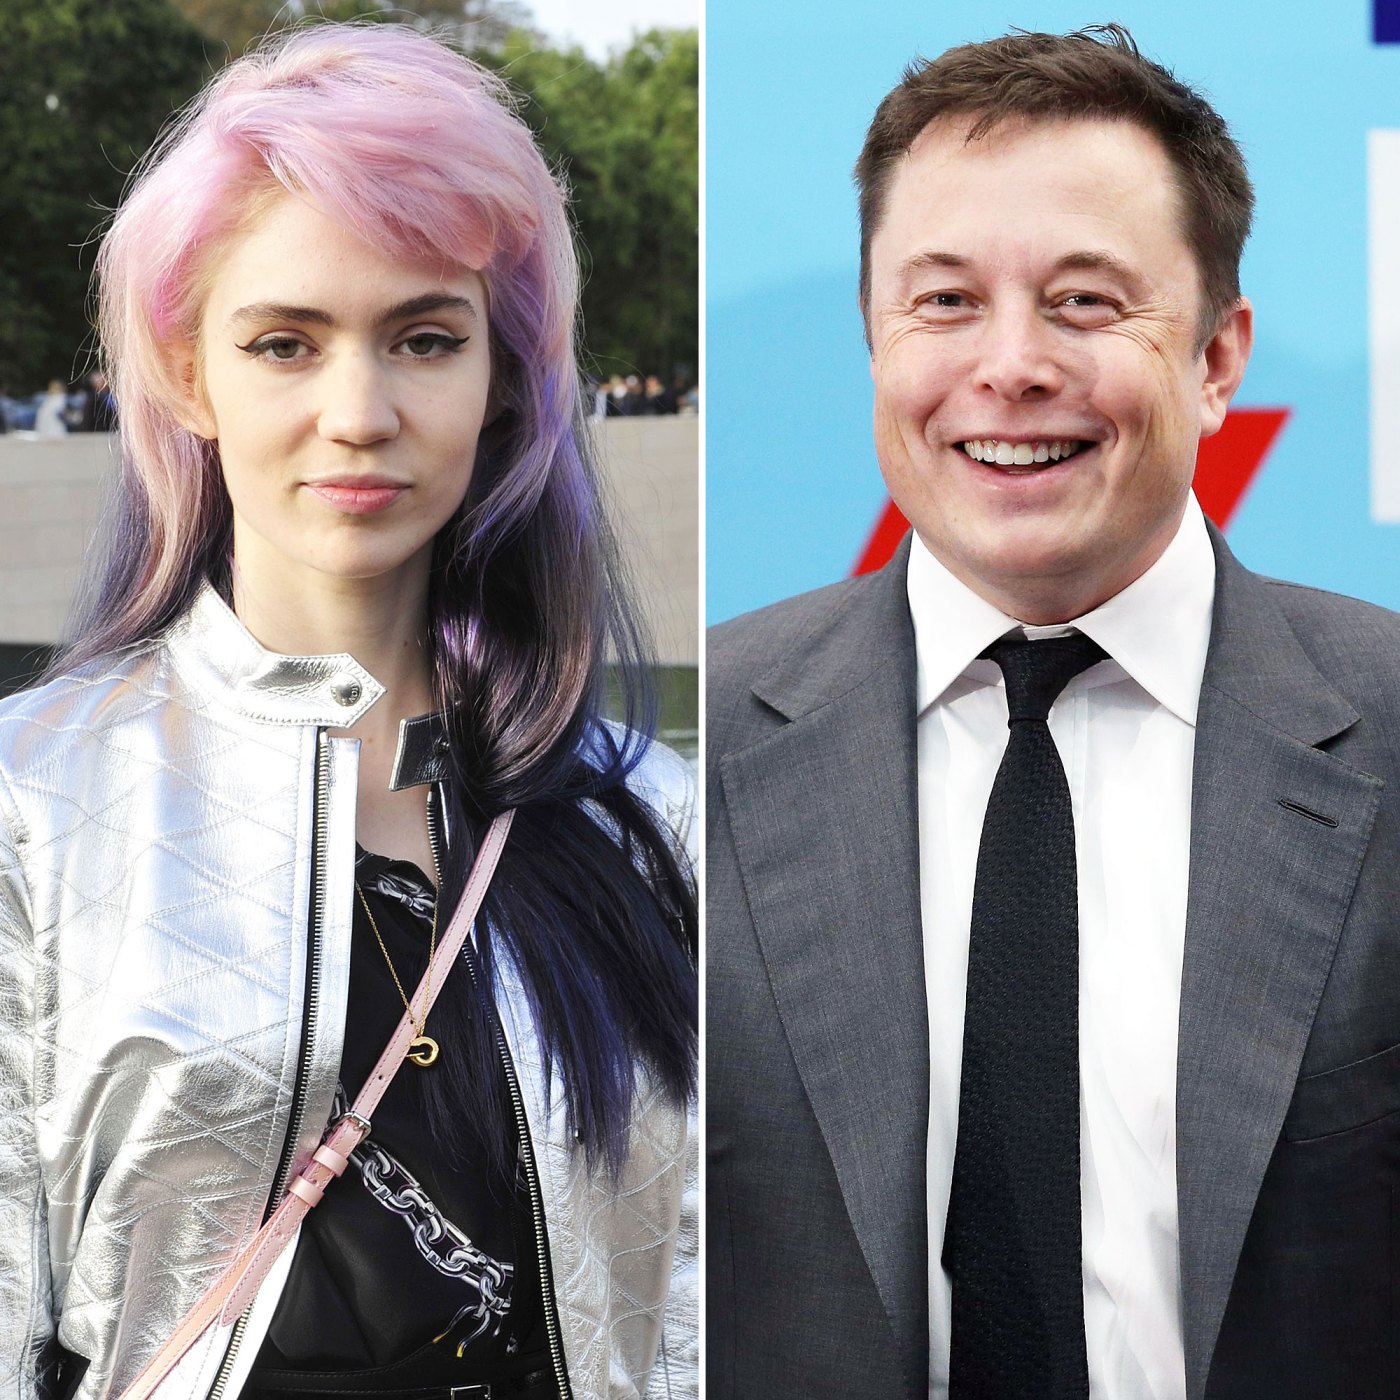 Spotted Together In China January 2019 Elon Musk And Grimes Relationship Timeline ?w=1400&quality=86&strip=all